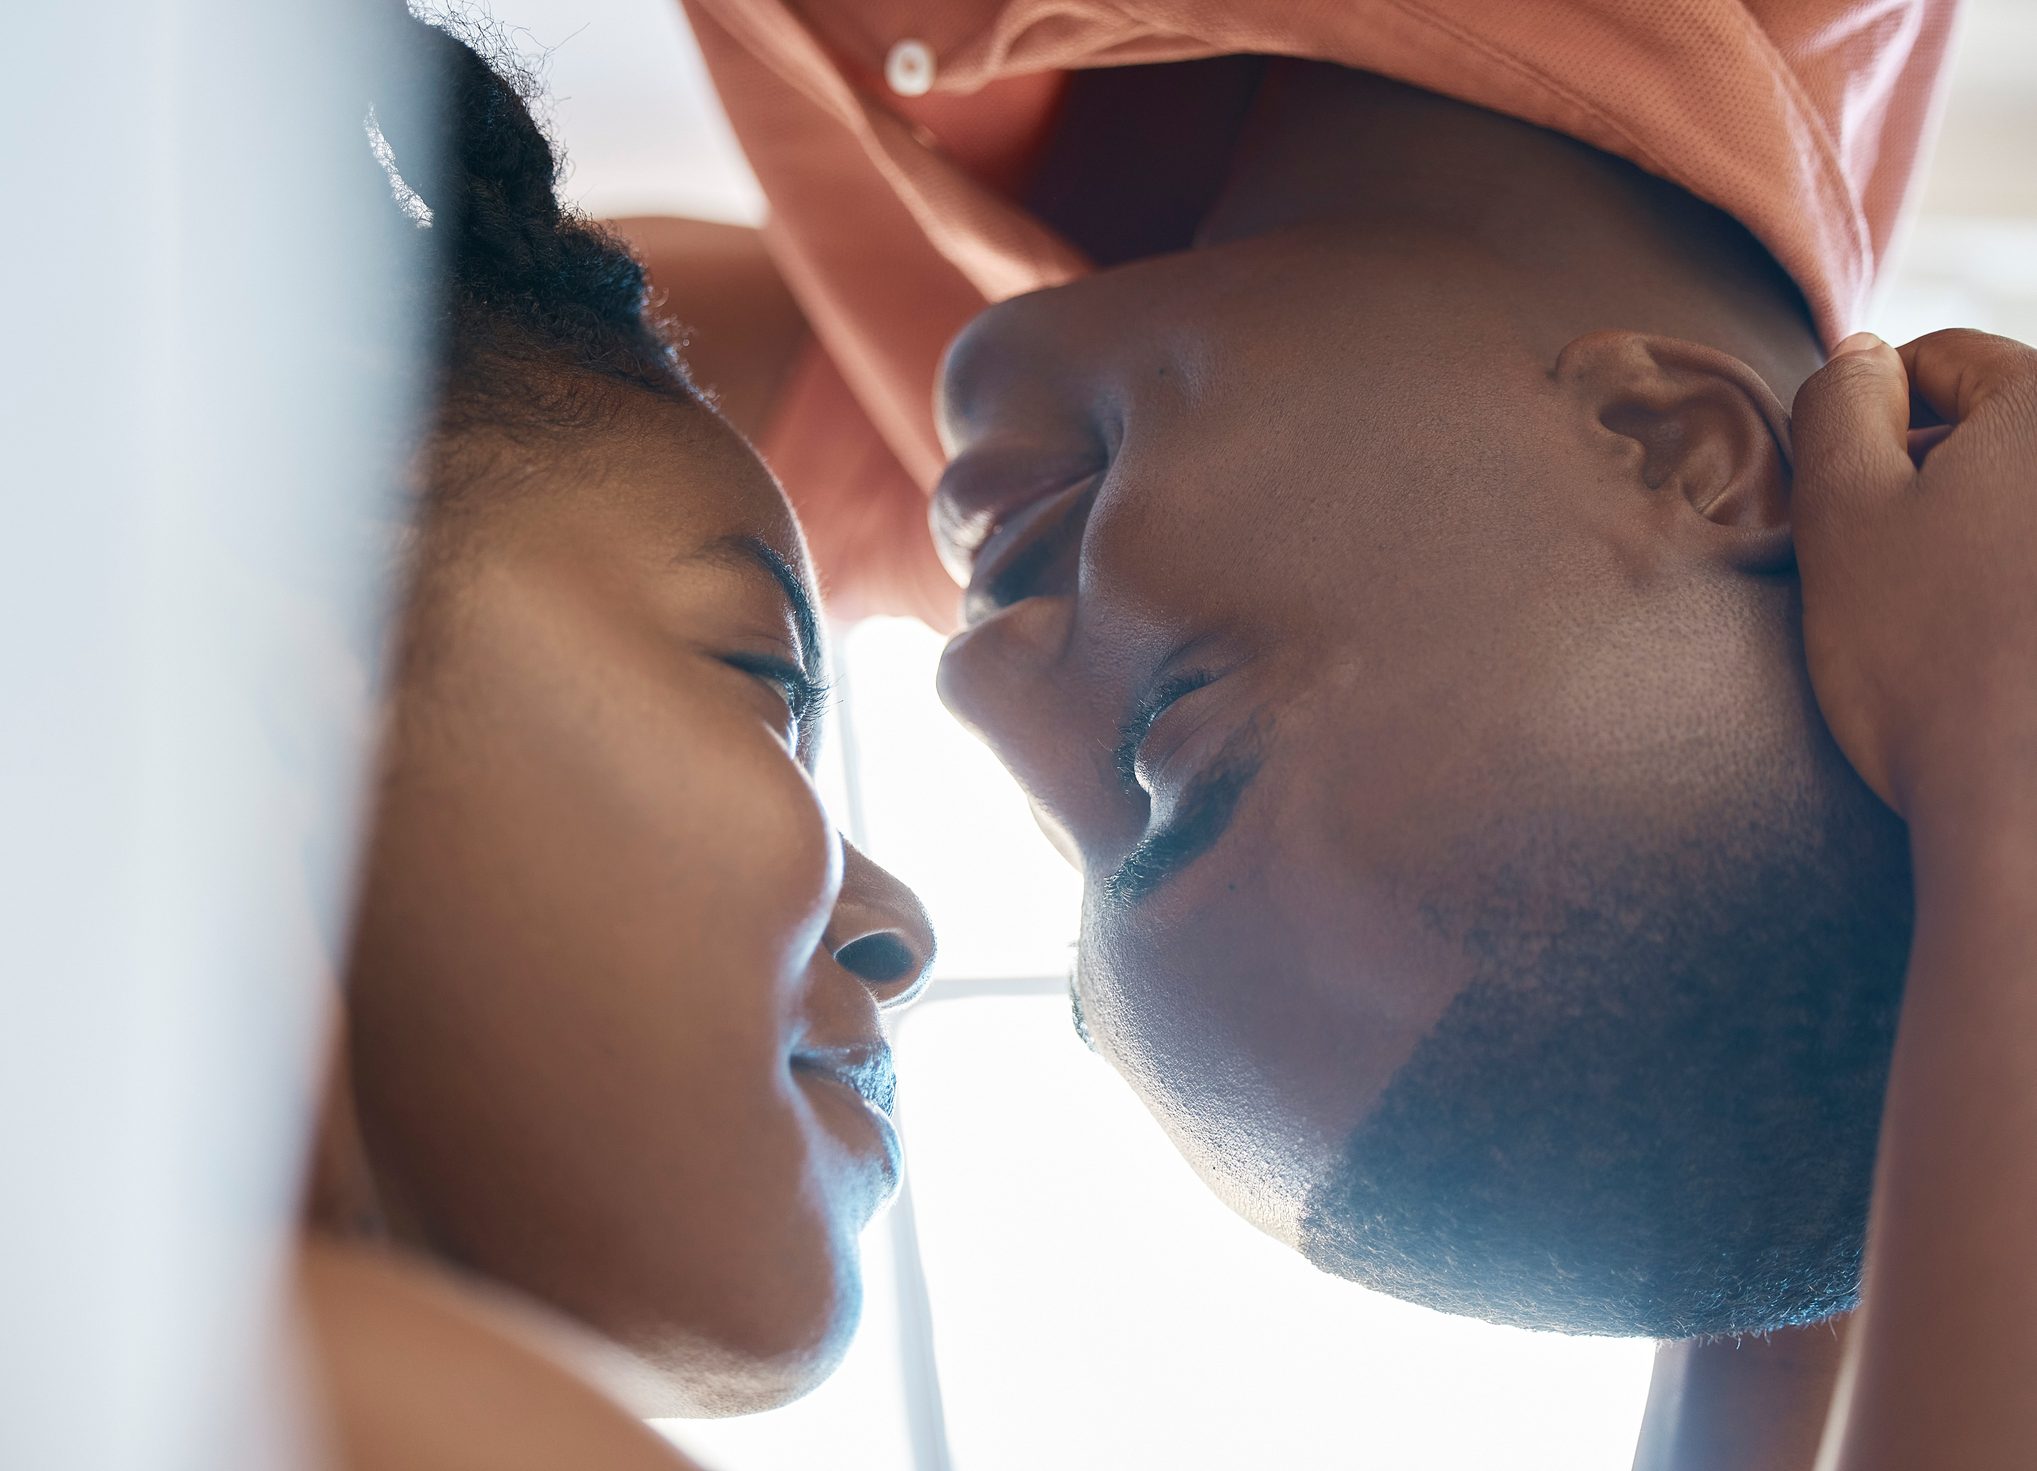 Sensual african american couple bonding and looking eye to eye while spending time together at home. Boyfriend leaning over his girlfriend lying on bed while relaxing together on the weekend exploring the g-spot